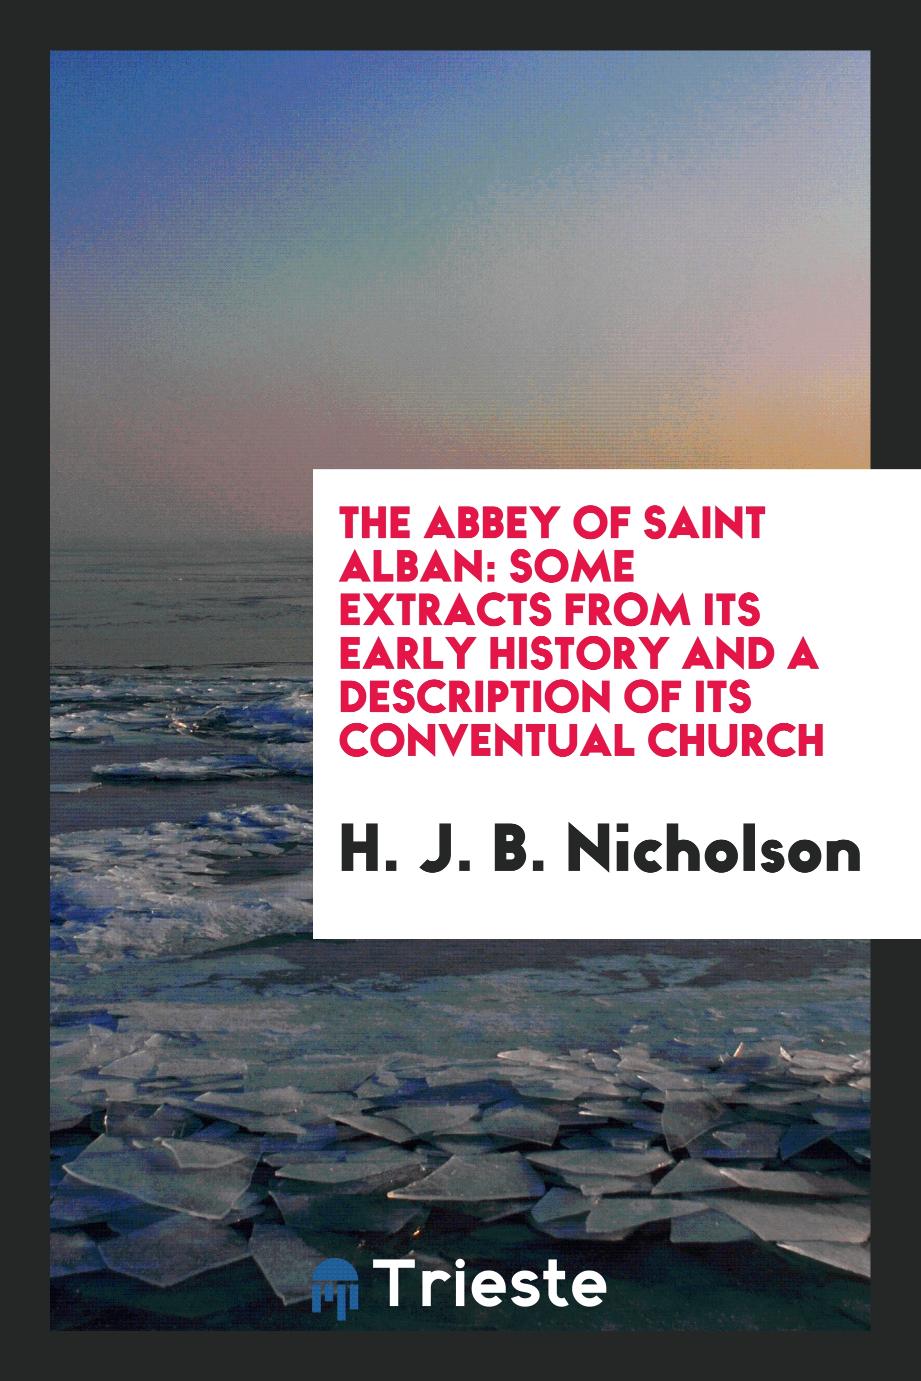 The Abbey of Saint Alban: Some Extracts from Its Early History and a Description of Its Conventual Church